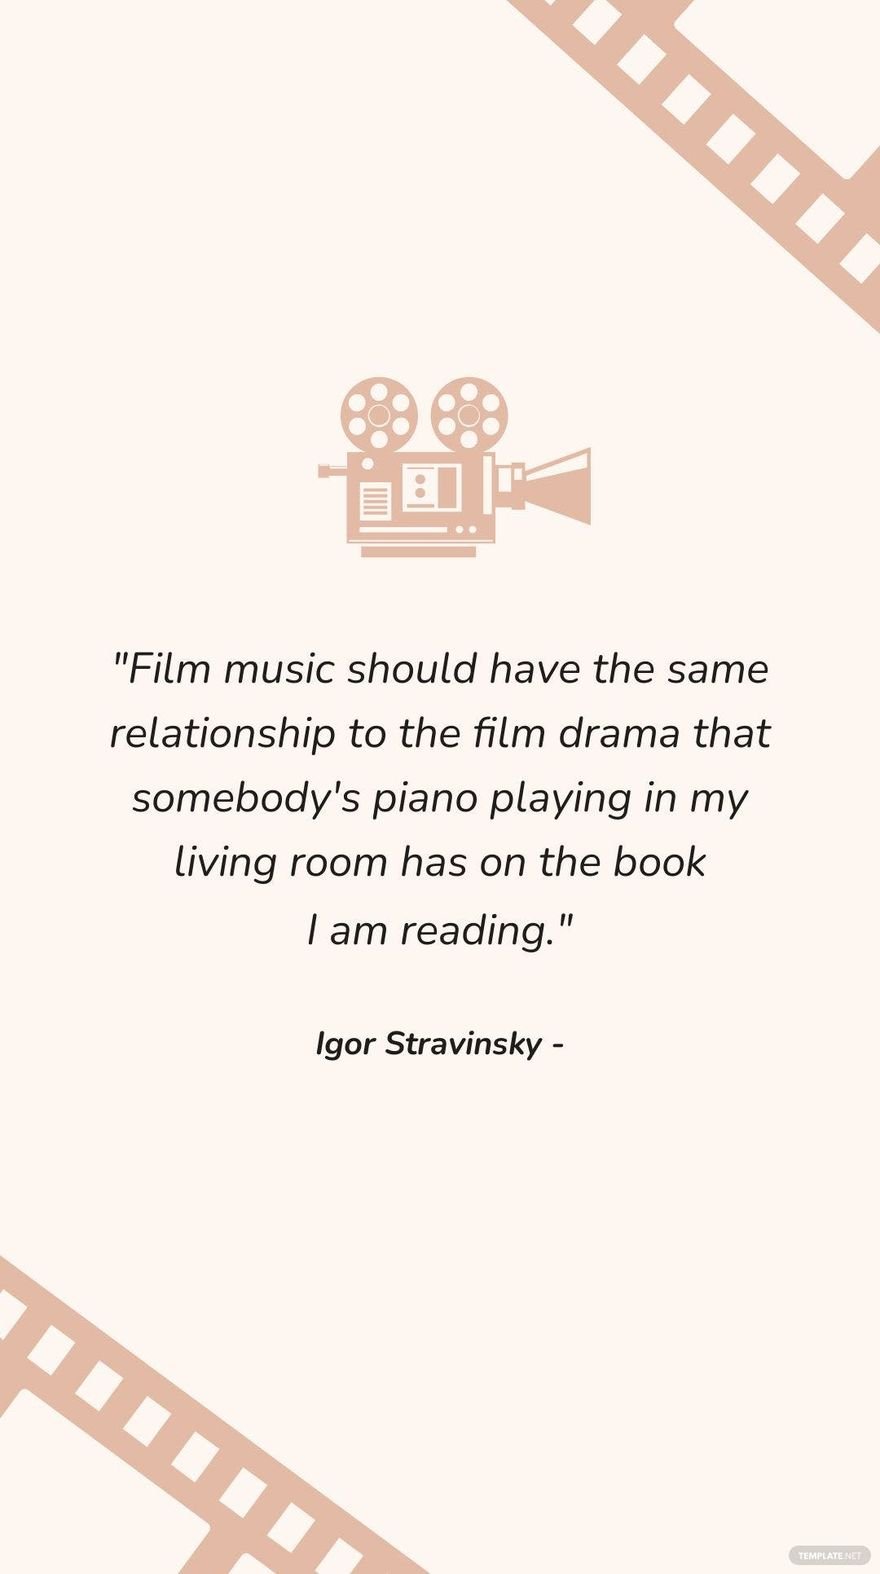 Igor Stravinsky - Film music should have the same relationship to the film drama that somebody's piano playing in my living room has on the book I am reading.